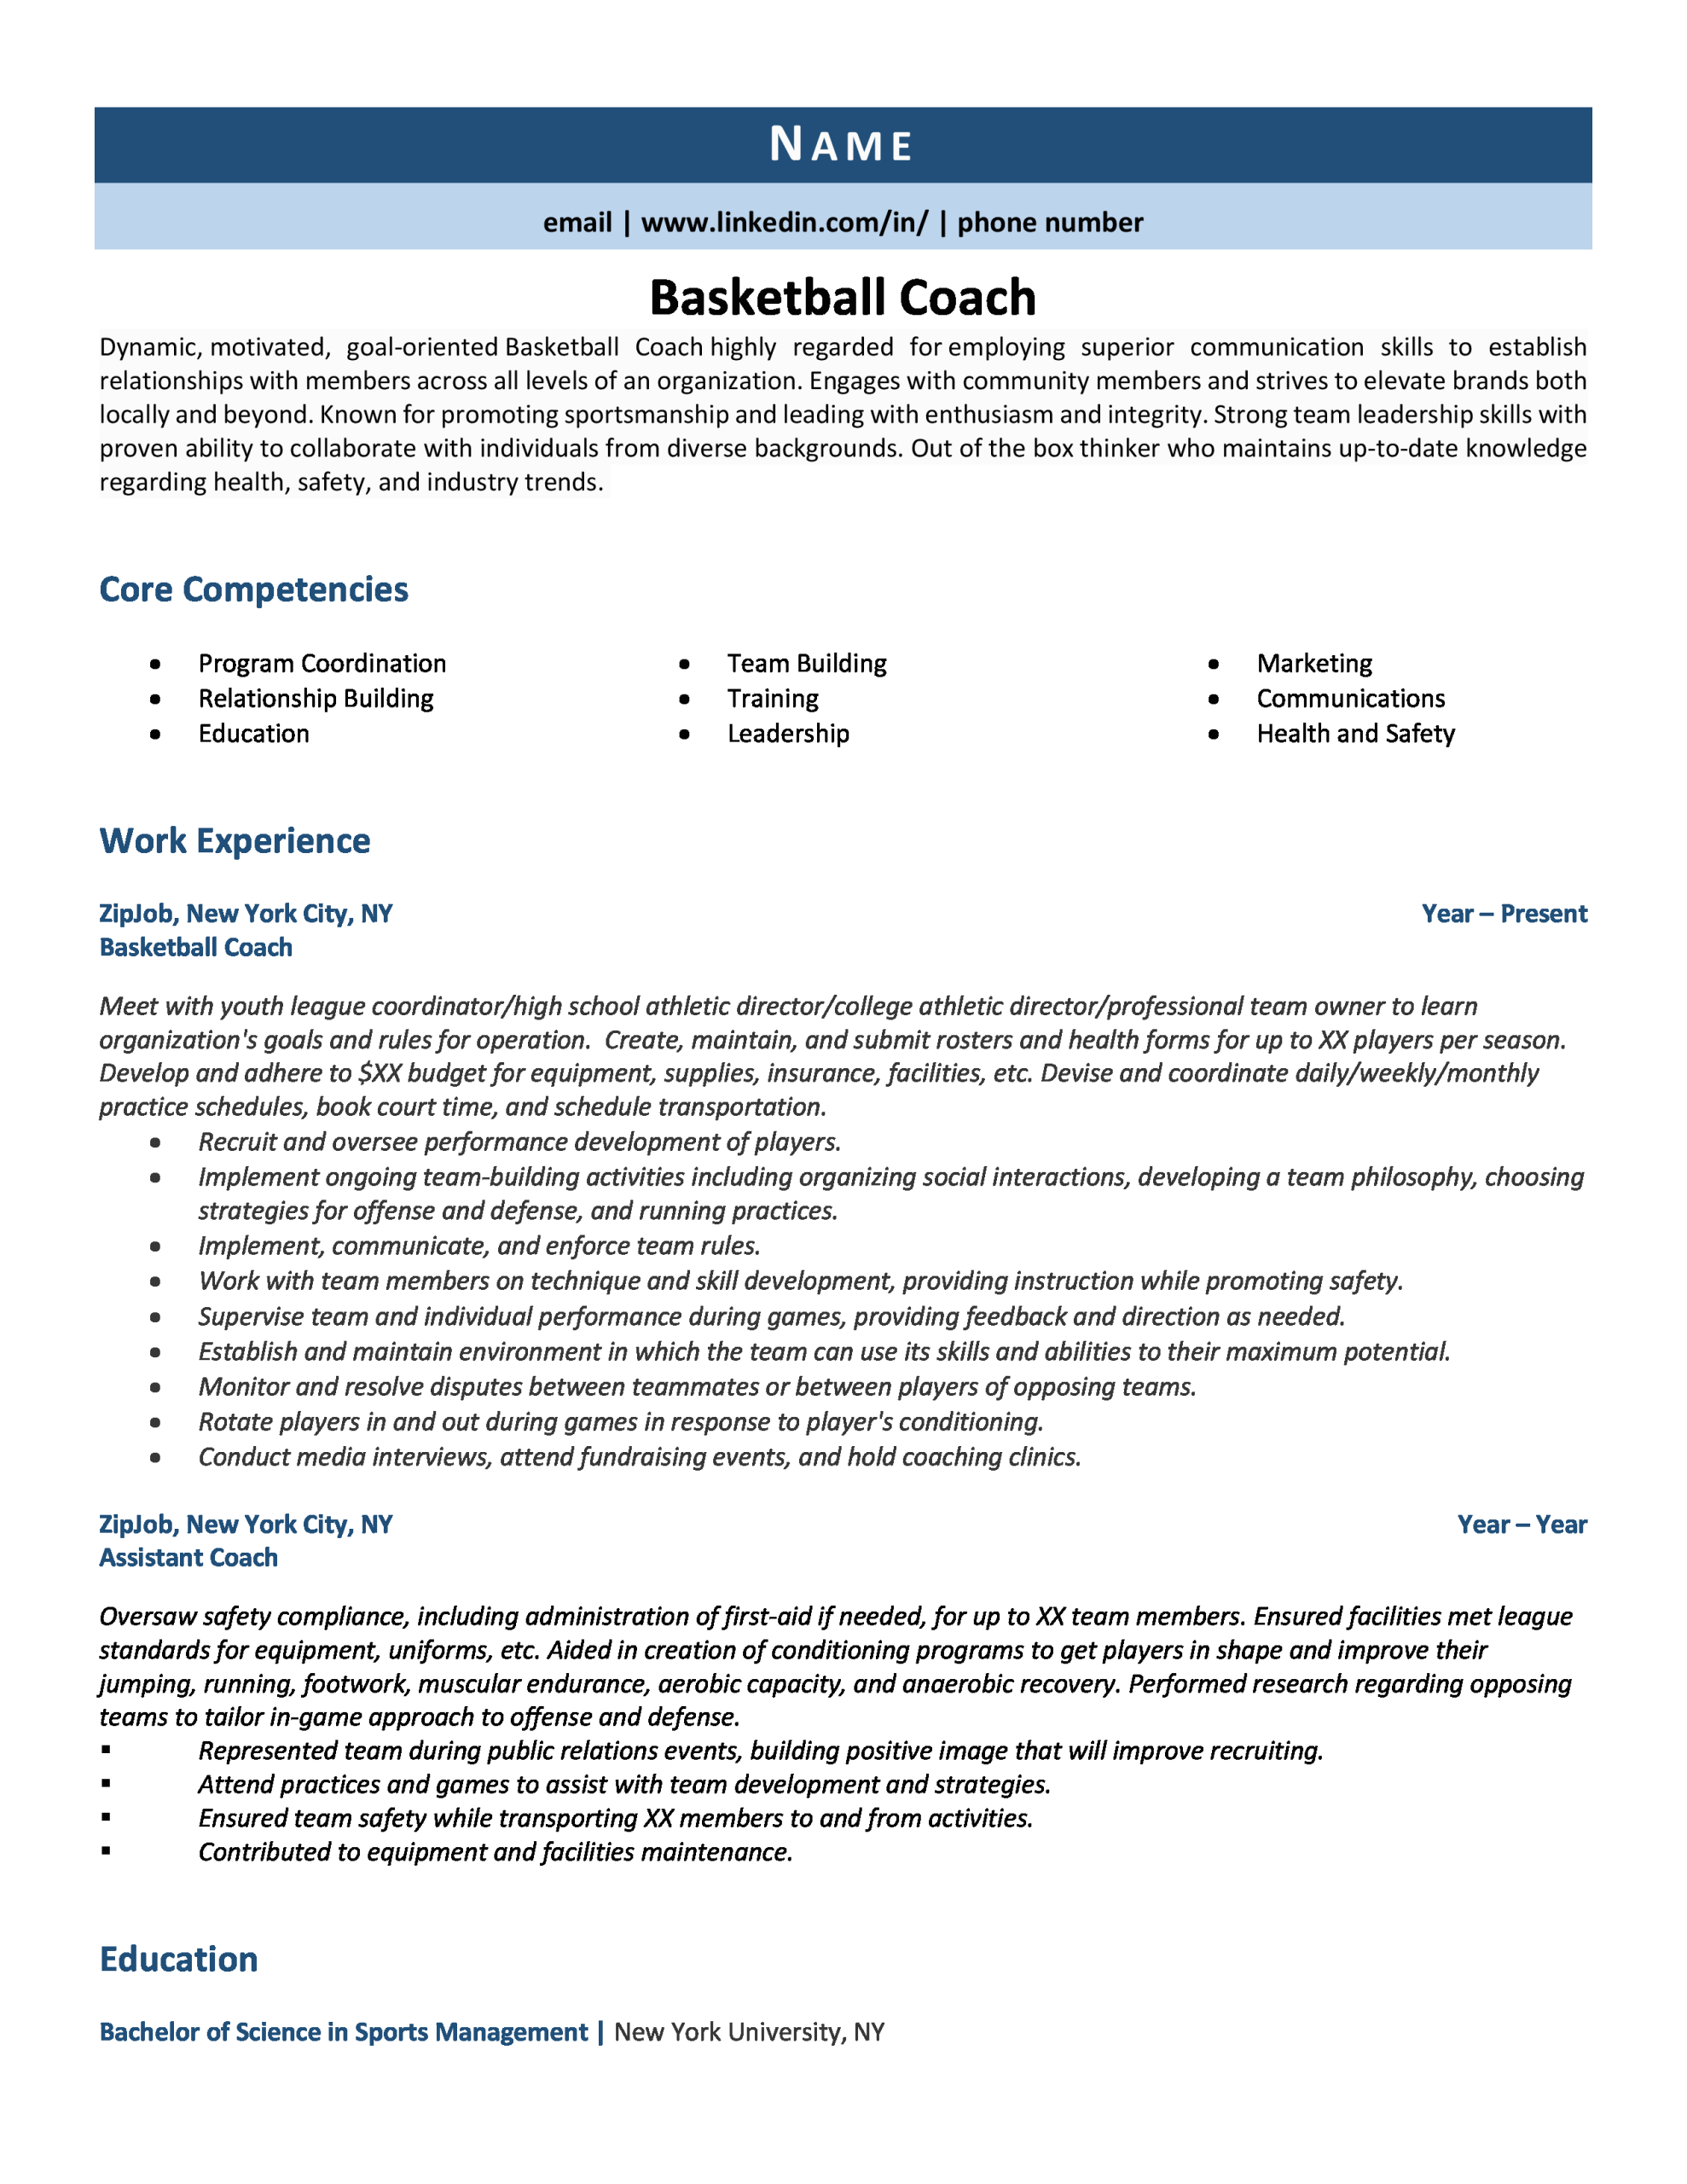 Sample Resume for College Coaching Position Basketball Coach Resume Example & Guideyour Plete Guide On How to